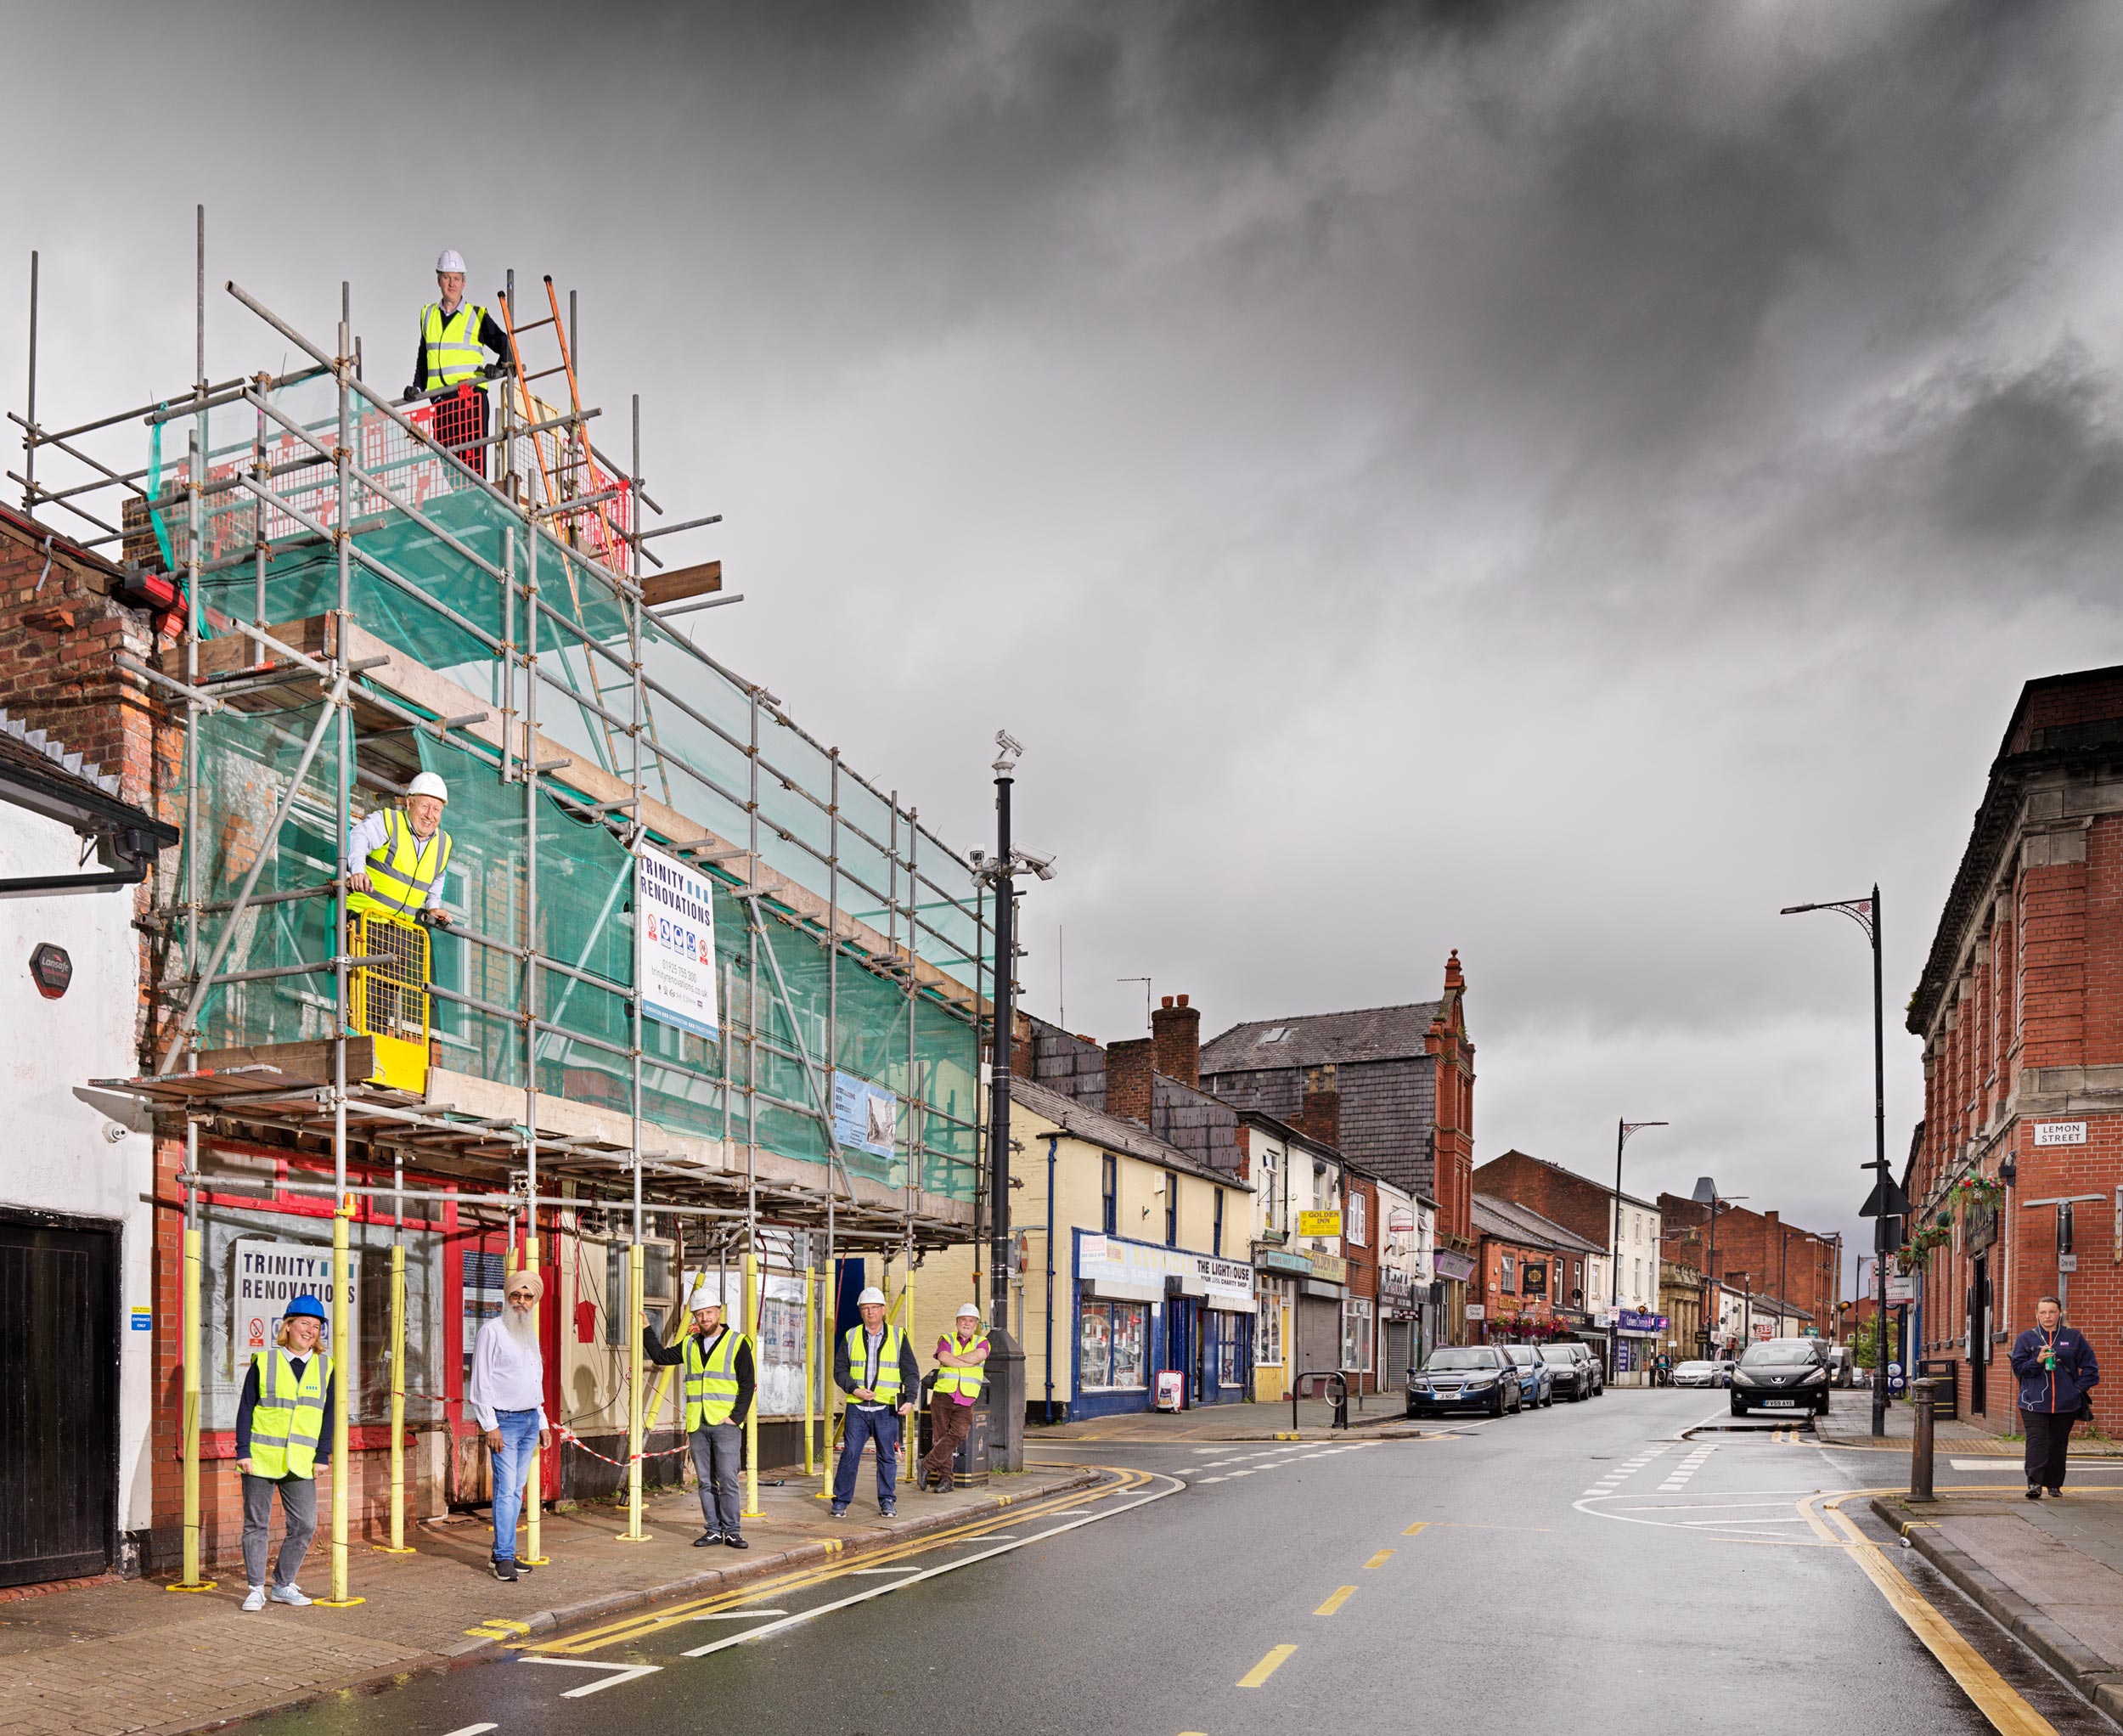 On the left side of the image six adults wearing hard hats and high visibility jackets and one man wearing a turban pose for a photo on and under three levels of scaffolding. The photo is taken from the middle of Elliott Street down its length.